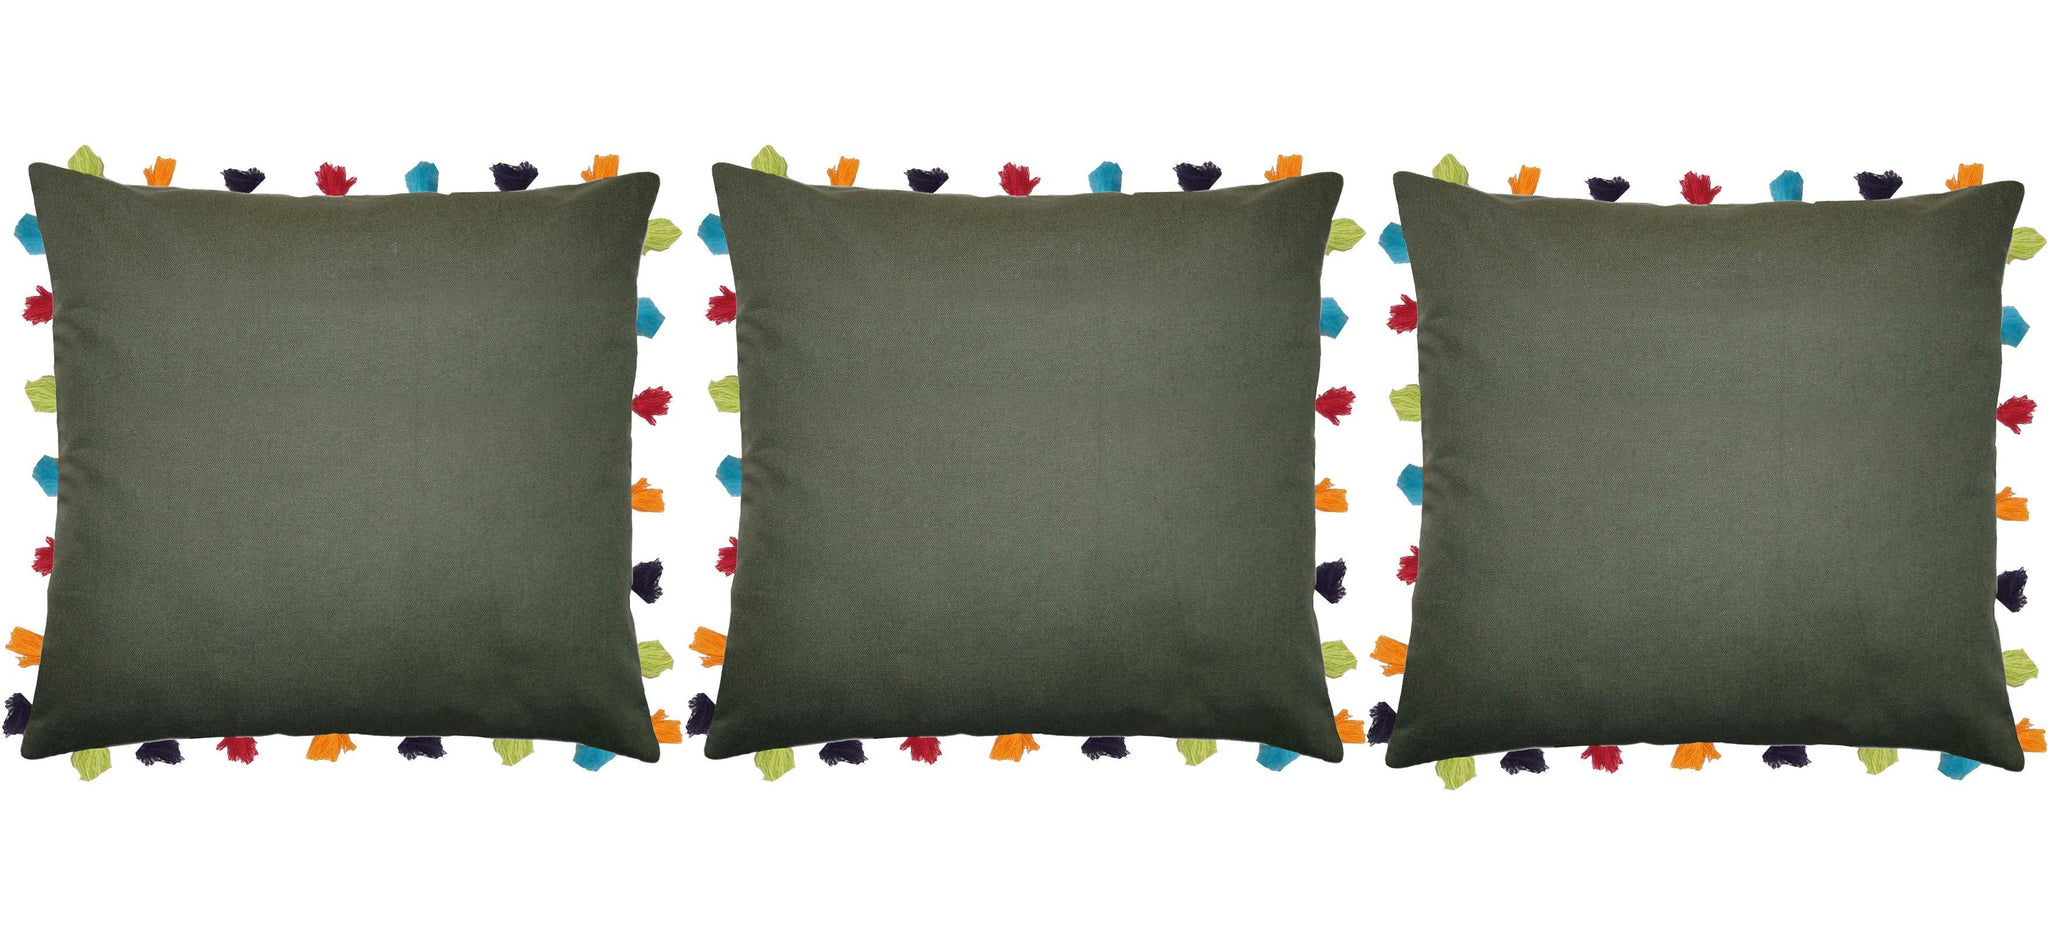 Lushomes Vineyard Green Cushion Cover with Colorful tassels (3 pcs, 20 x 20”) - Lushomes